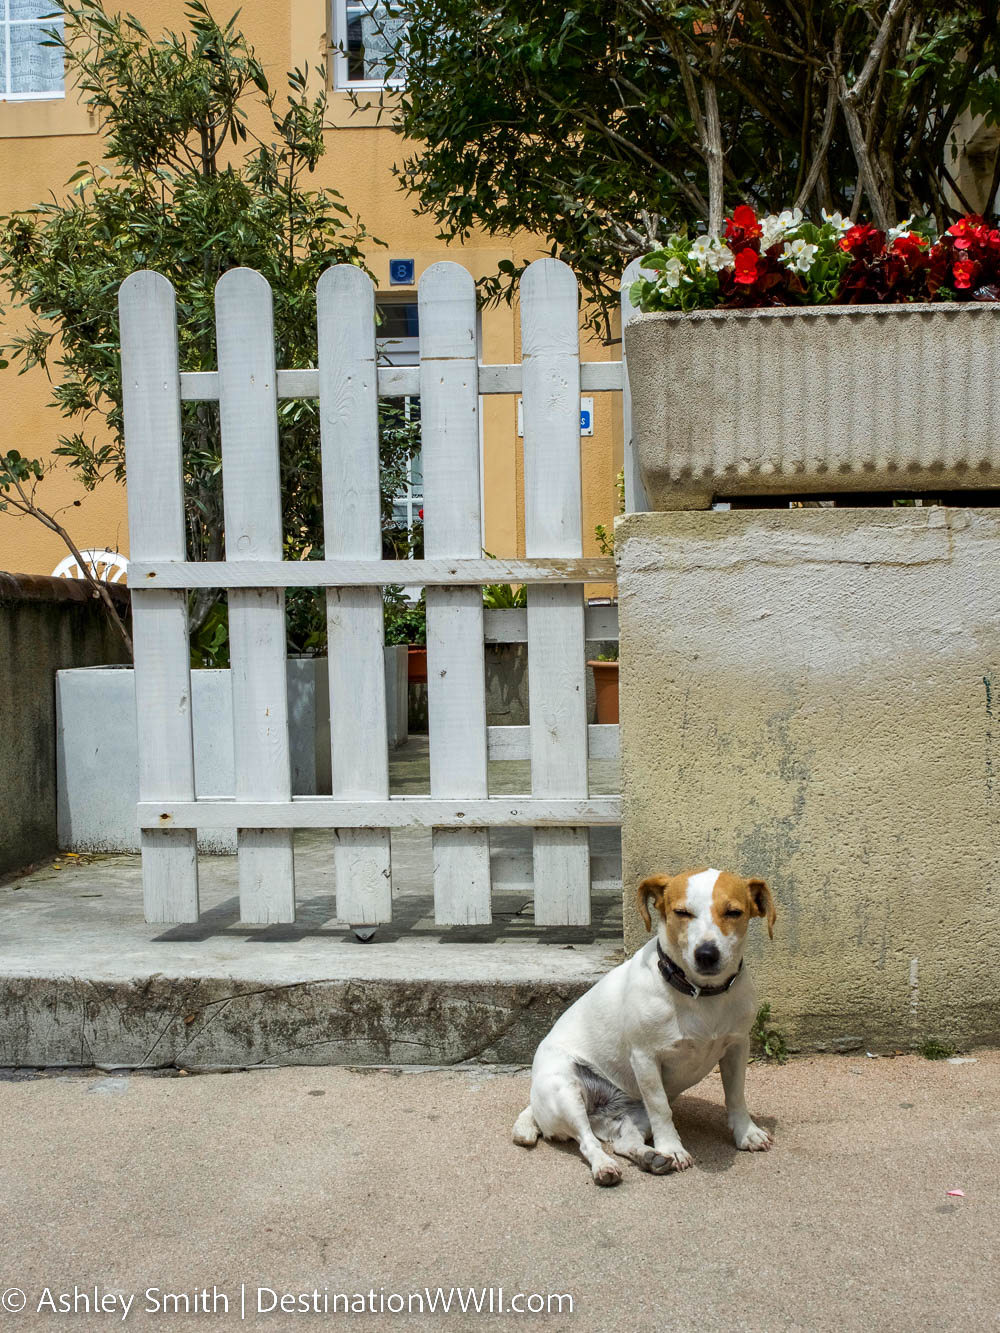 small dog in front of a white fence with red flowers